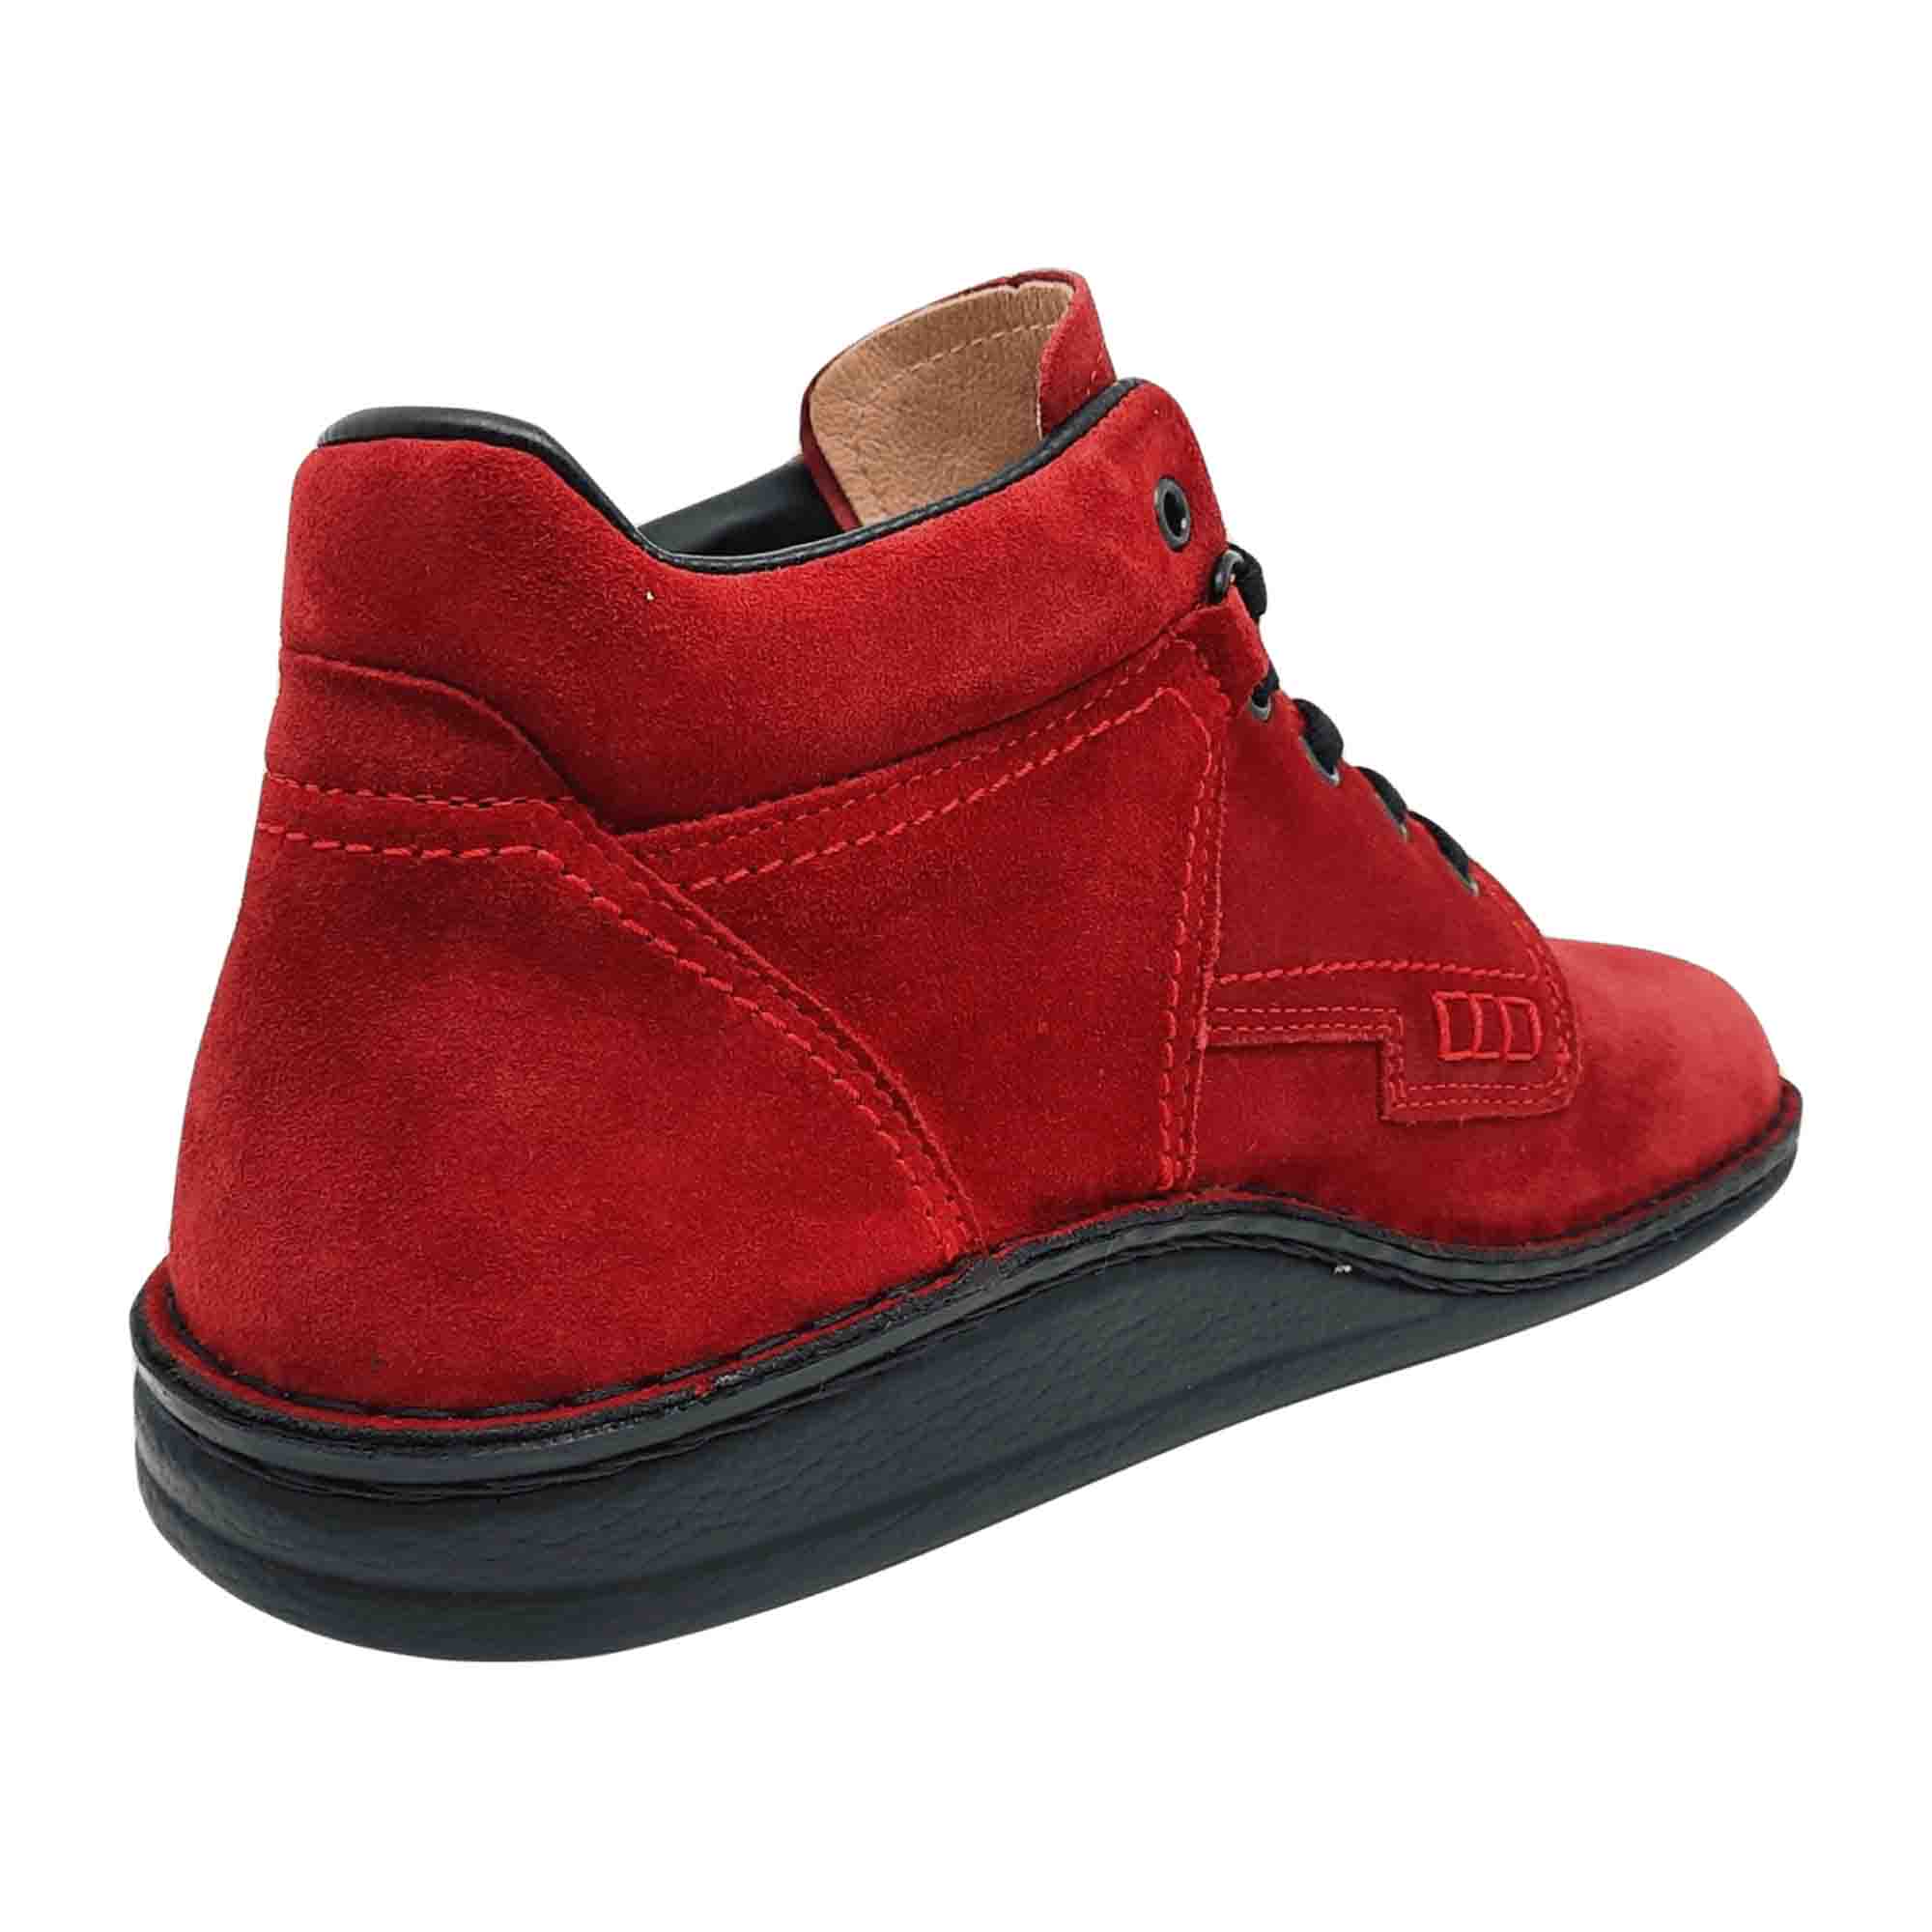 Finn Comfort Linz Women's Comfortable Shoes in Chili Red